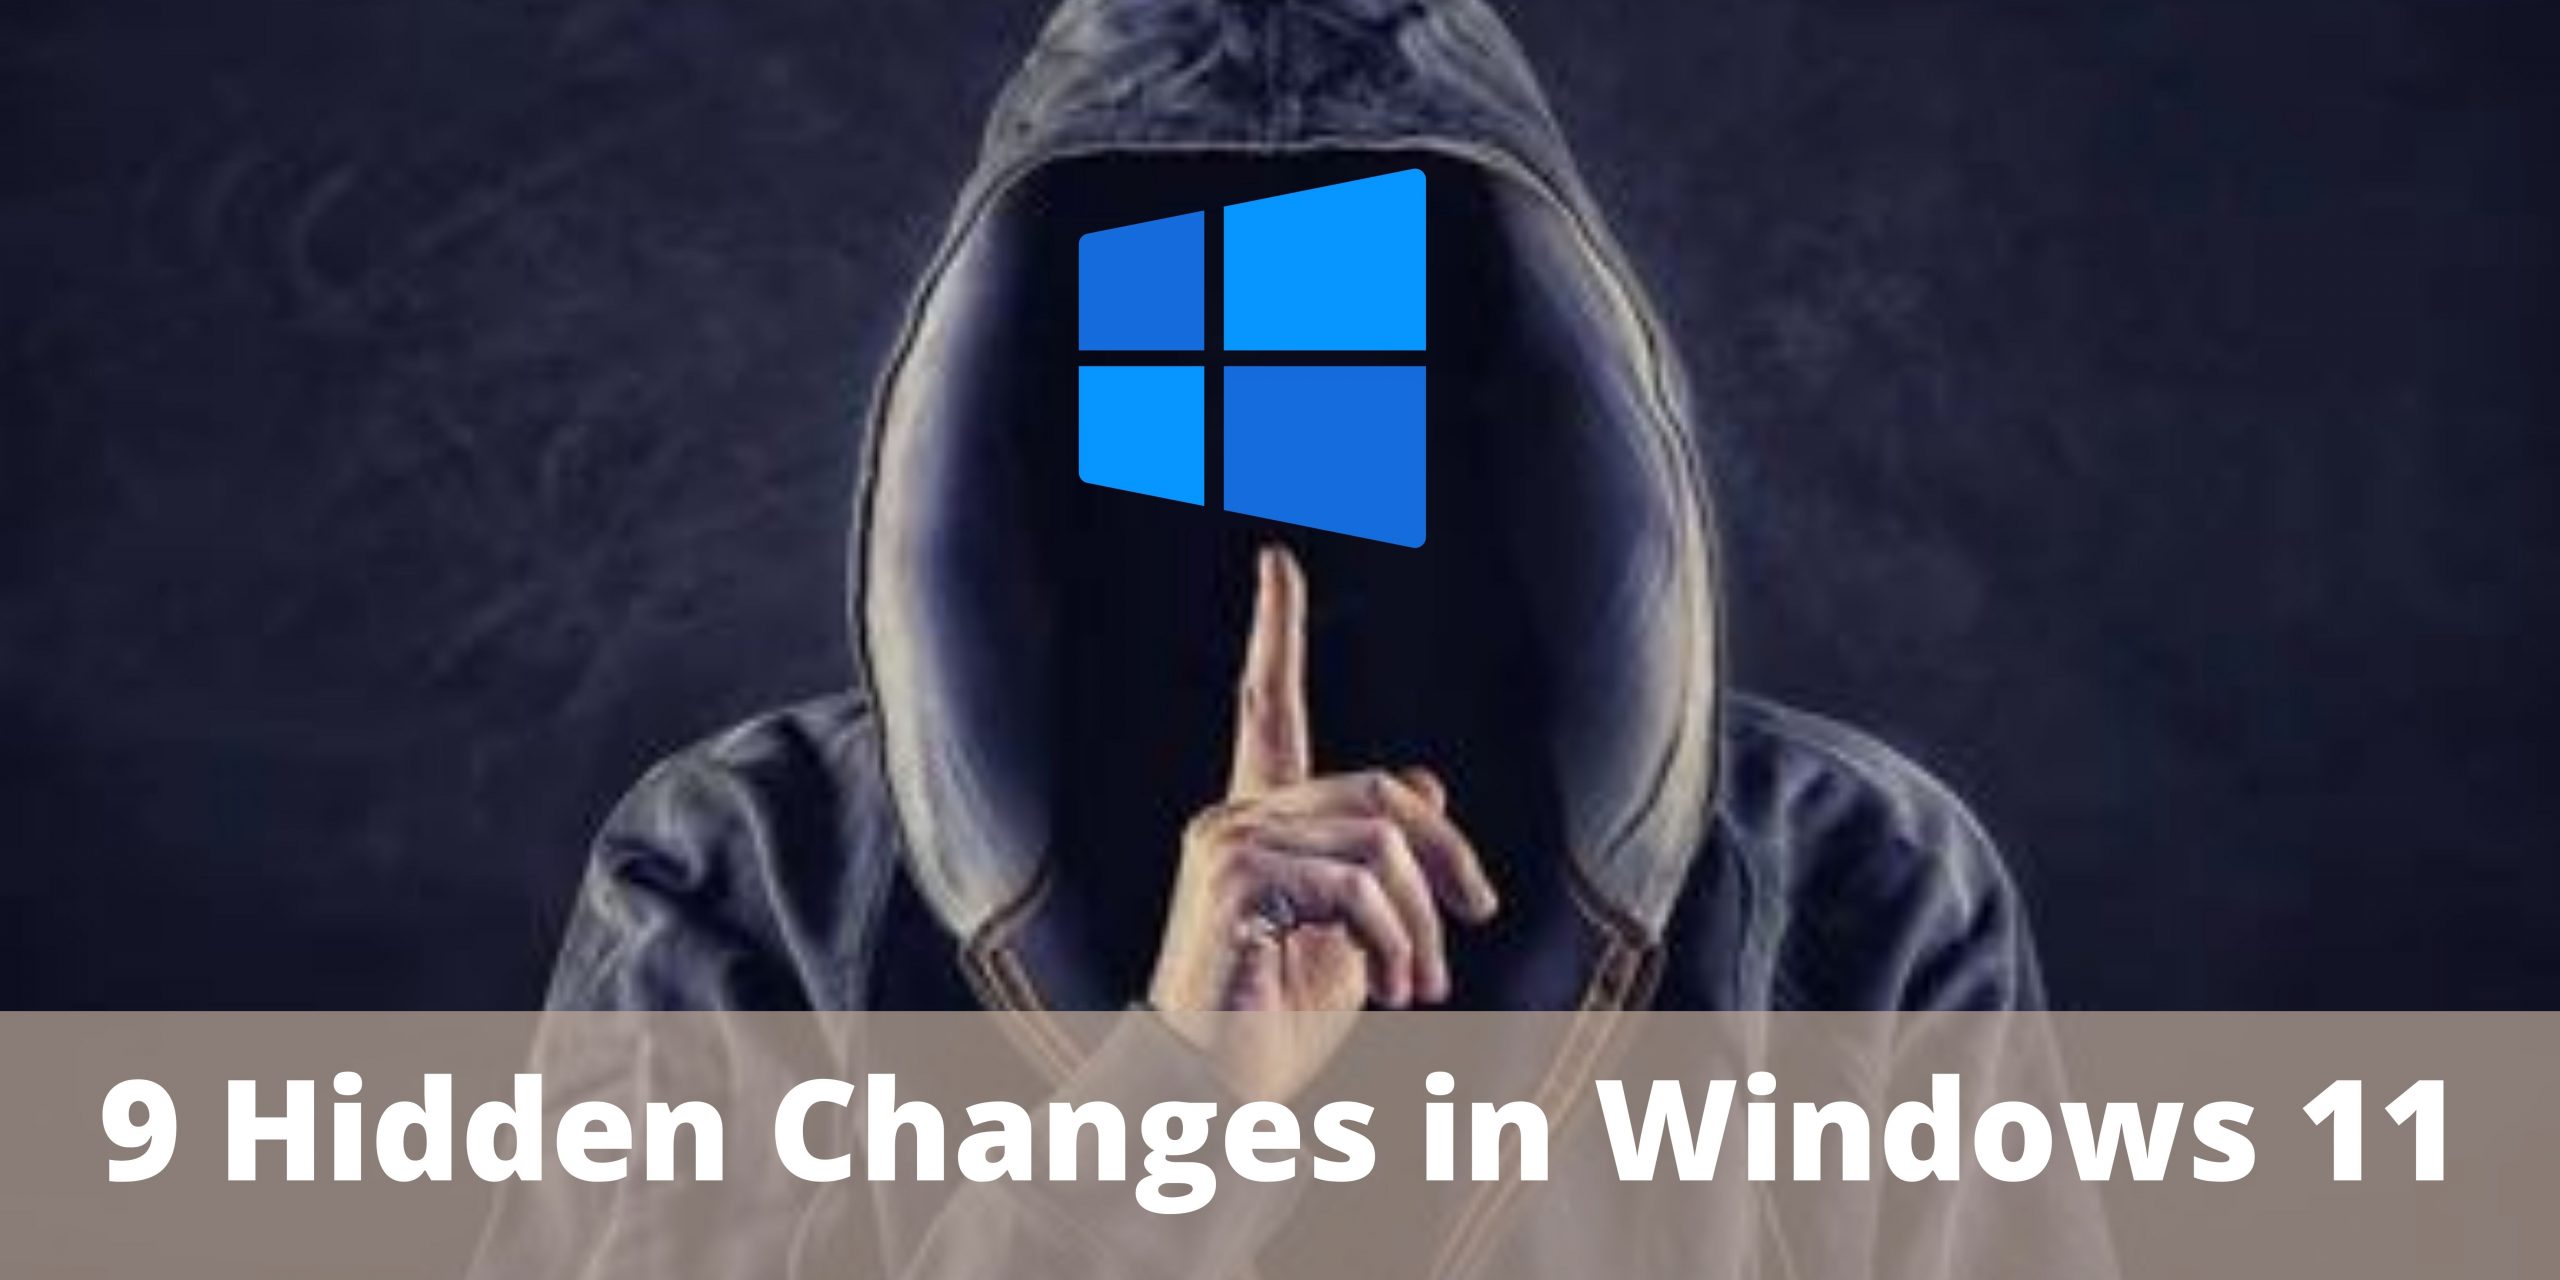 9 Hidden Changes in Windows 11 You Need To Know